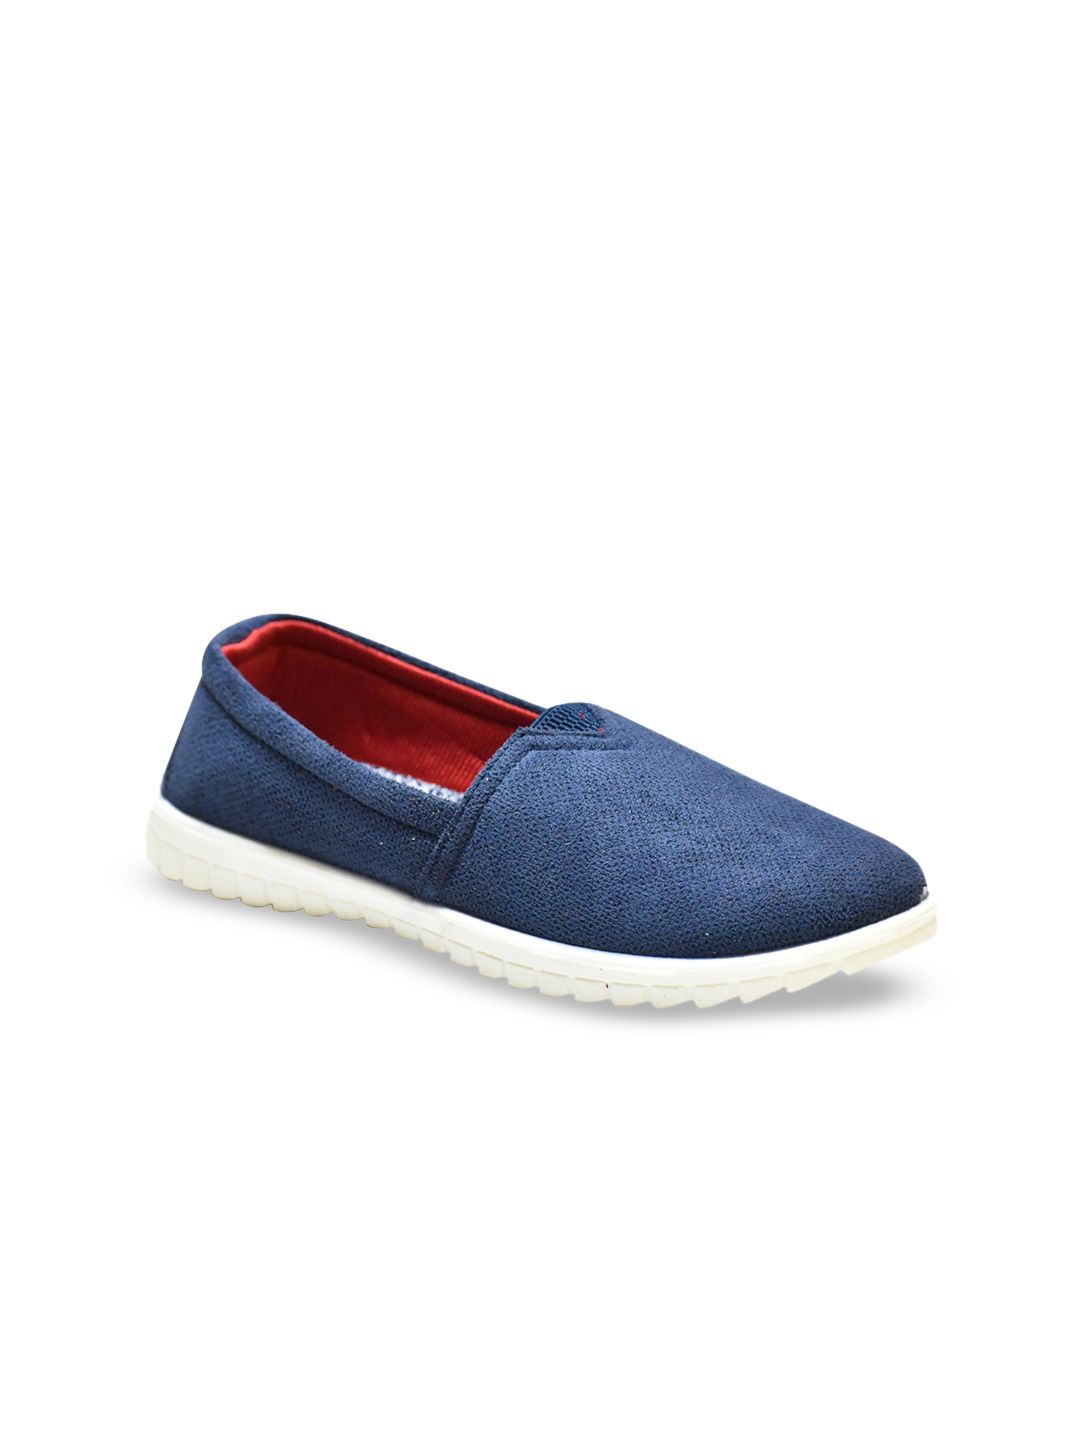 Ajanta Women Lightweight Textile Comfort Insole Contrast Sole Slip-On Sneakers Price in India